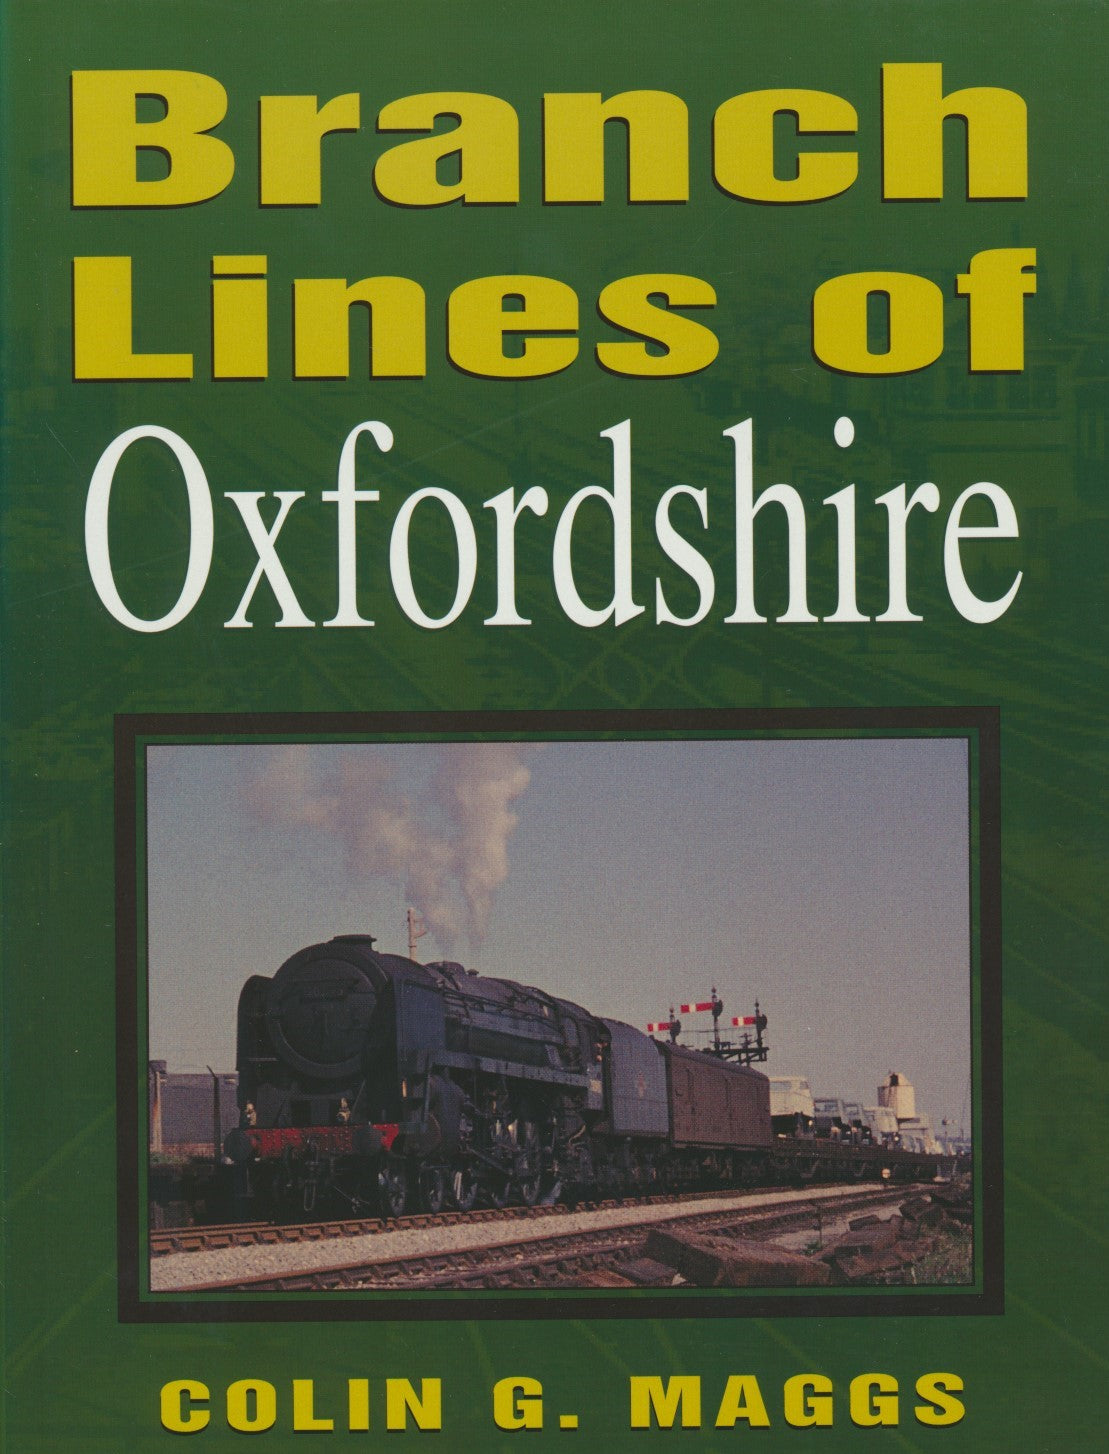 Branch Lines of Oxfordshire